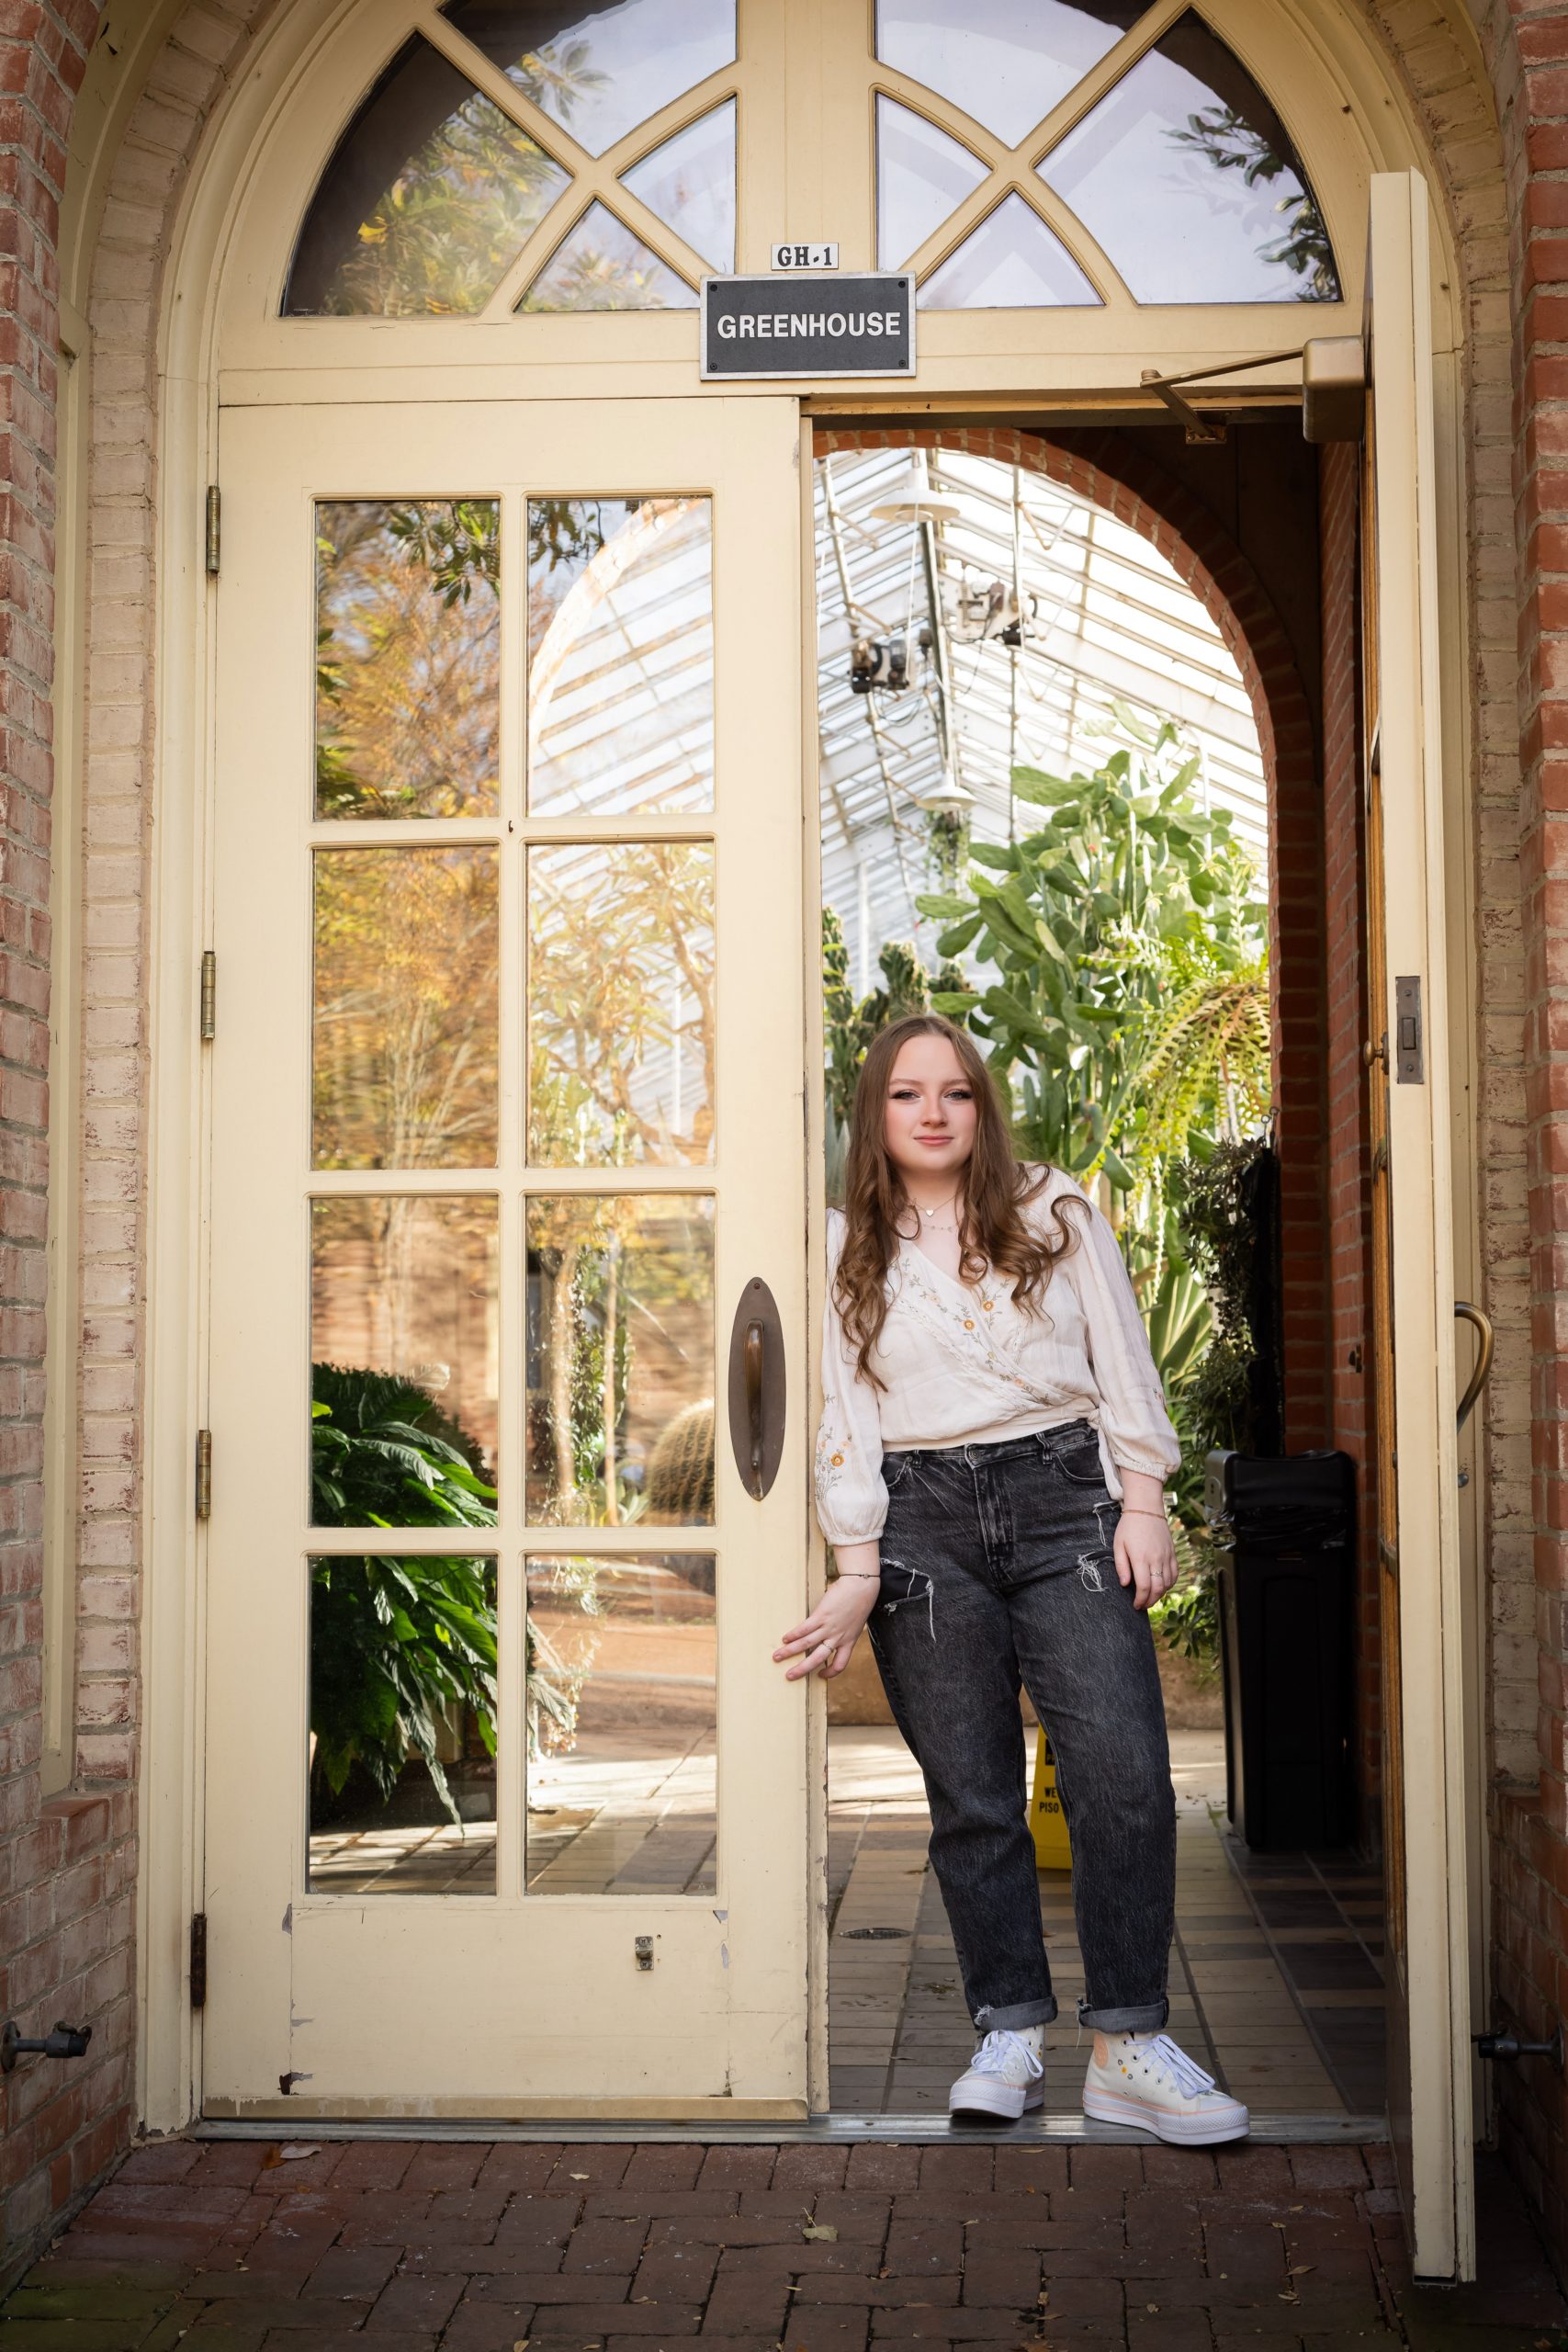 A woman standing in front of an open door, ready to embark on a new journey.